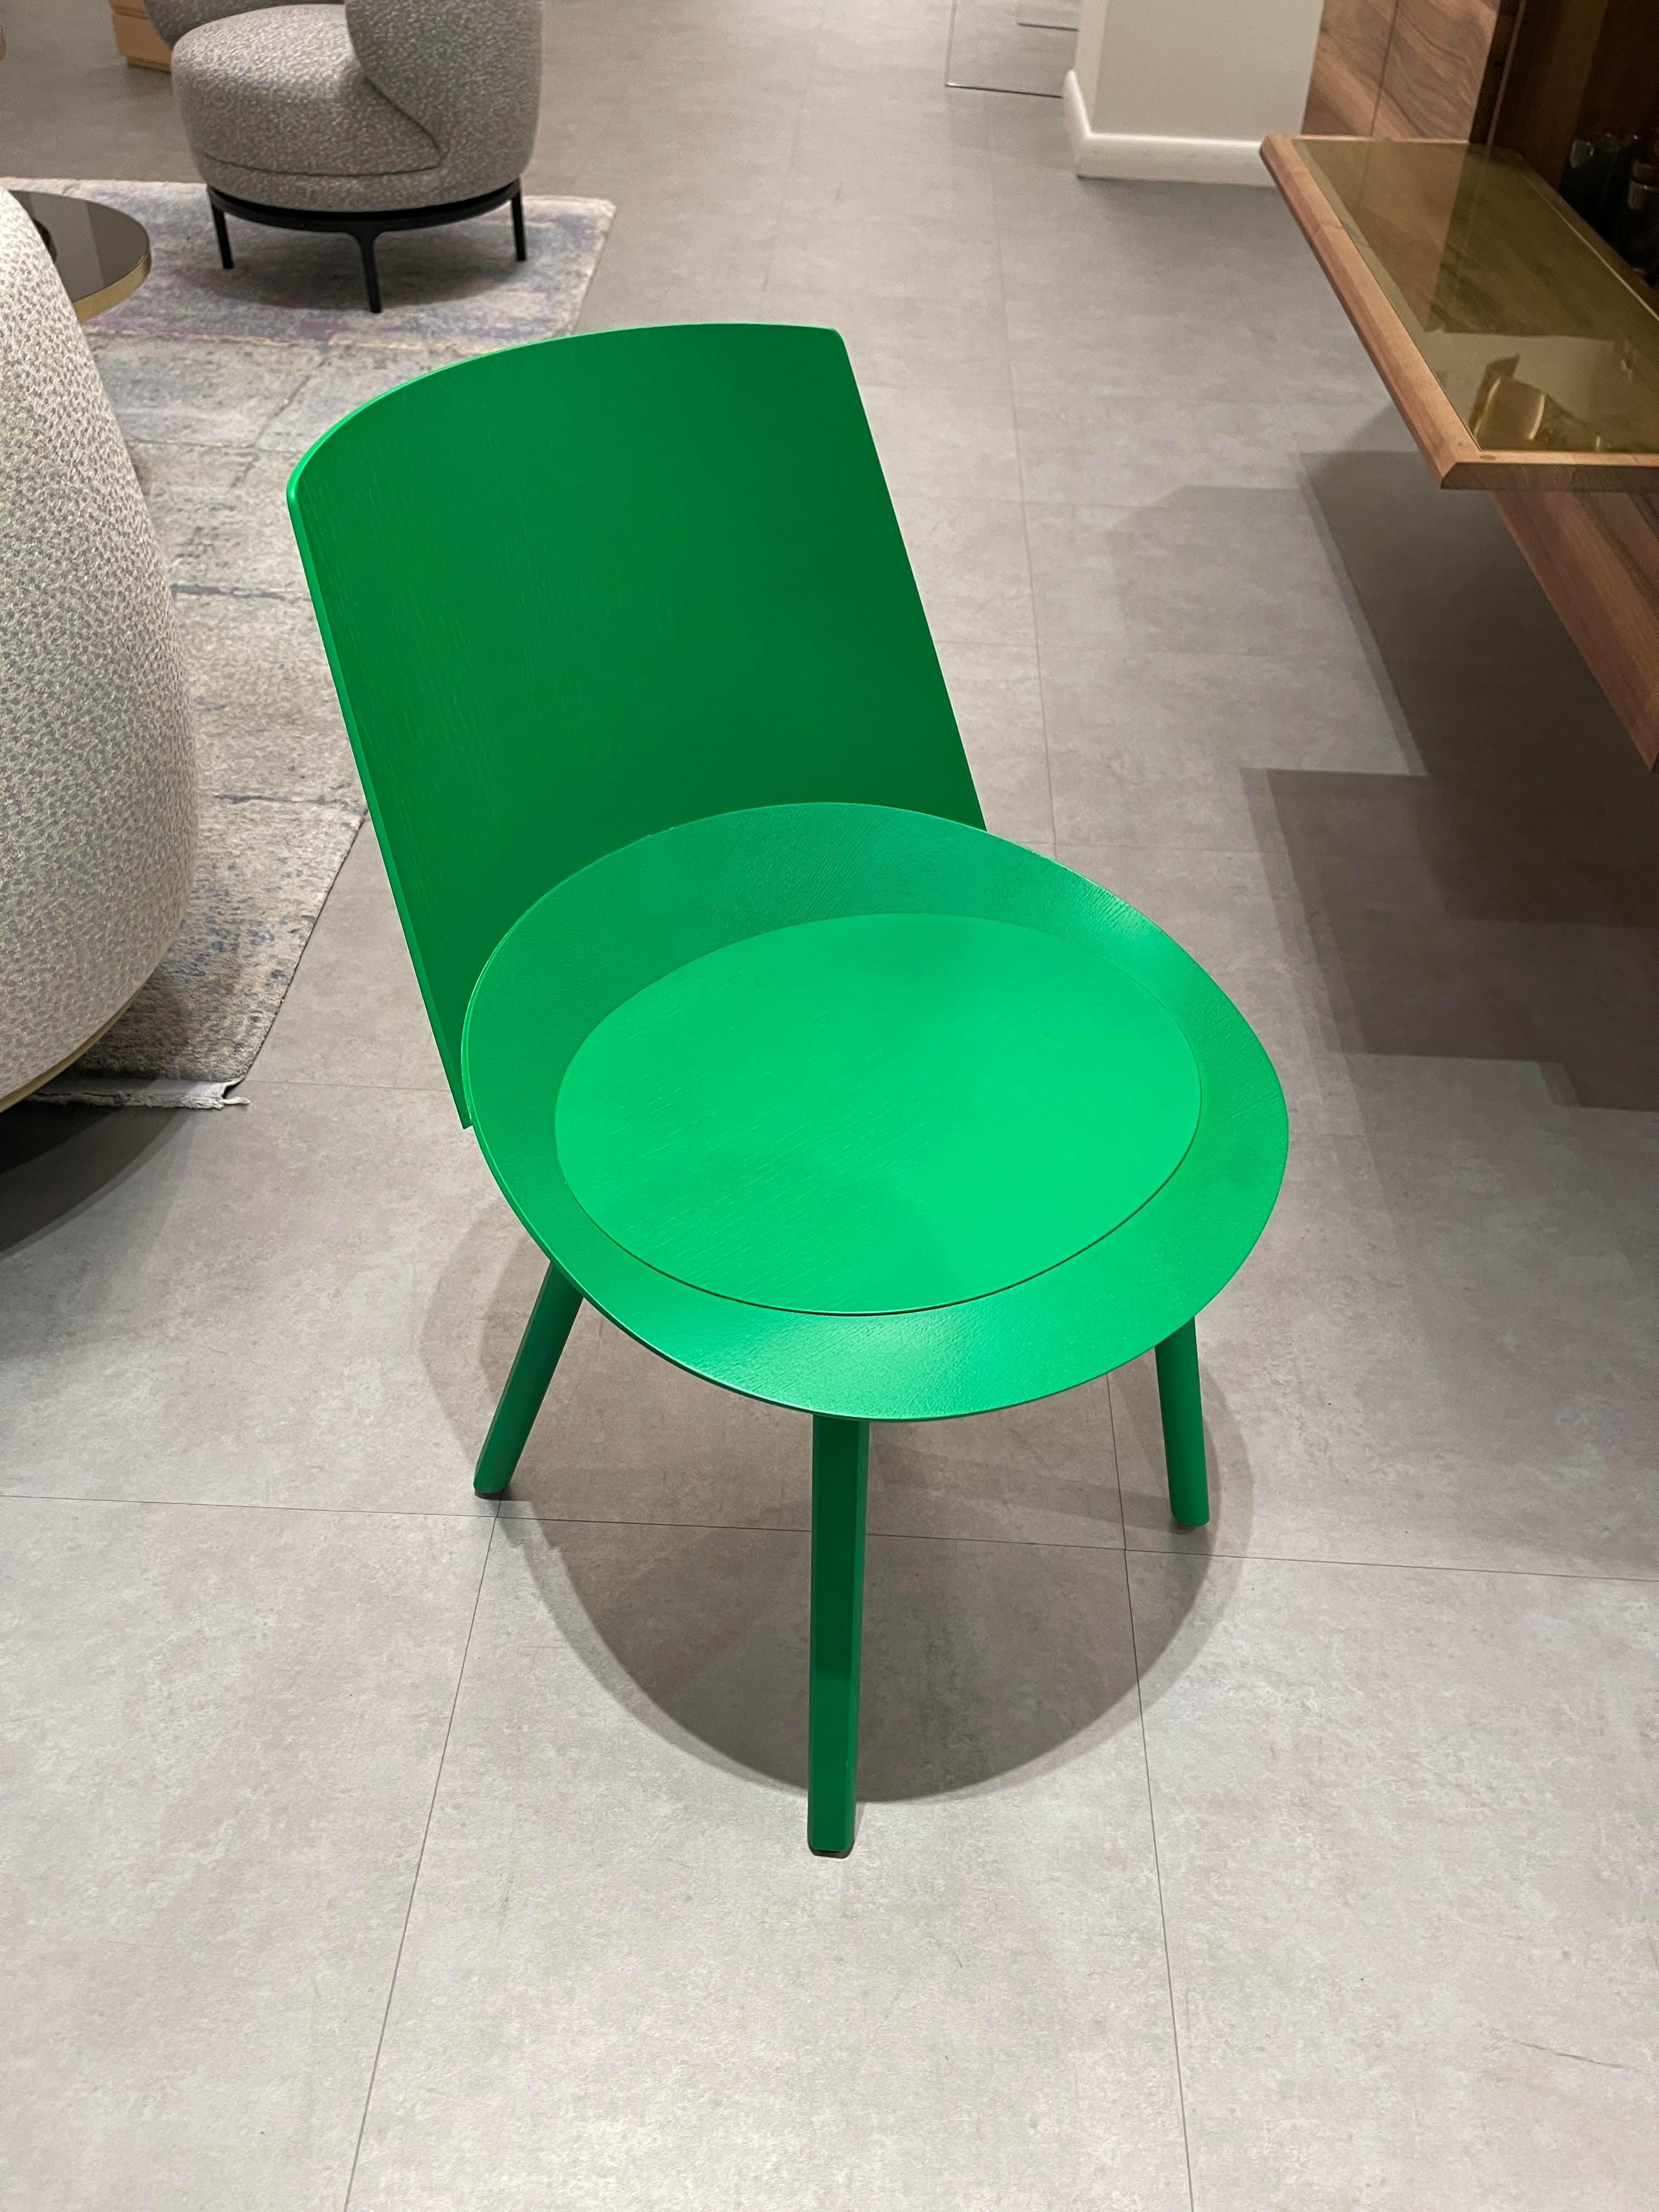 HOUDINI, custom made side chair, Oak Veneer, stained, lacquered,
Colour: luminous green, L500 W575 H800 mm, 
Atomic green RAL6038 Luminous green
E15 celebrates ten years of chair Houdini by Stefan Diez with a curated palette of anniversary